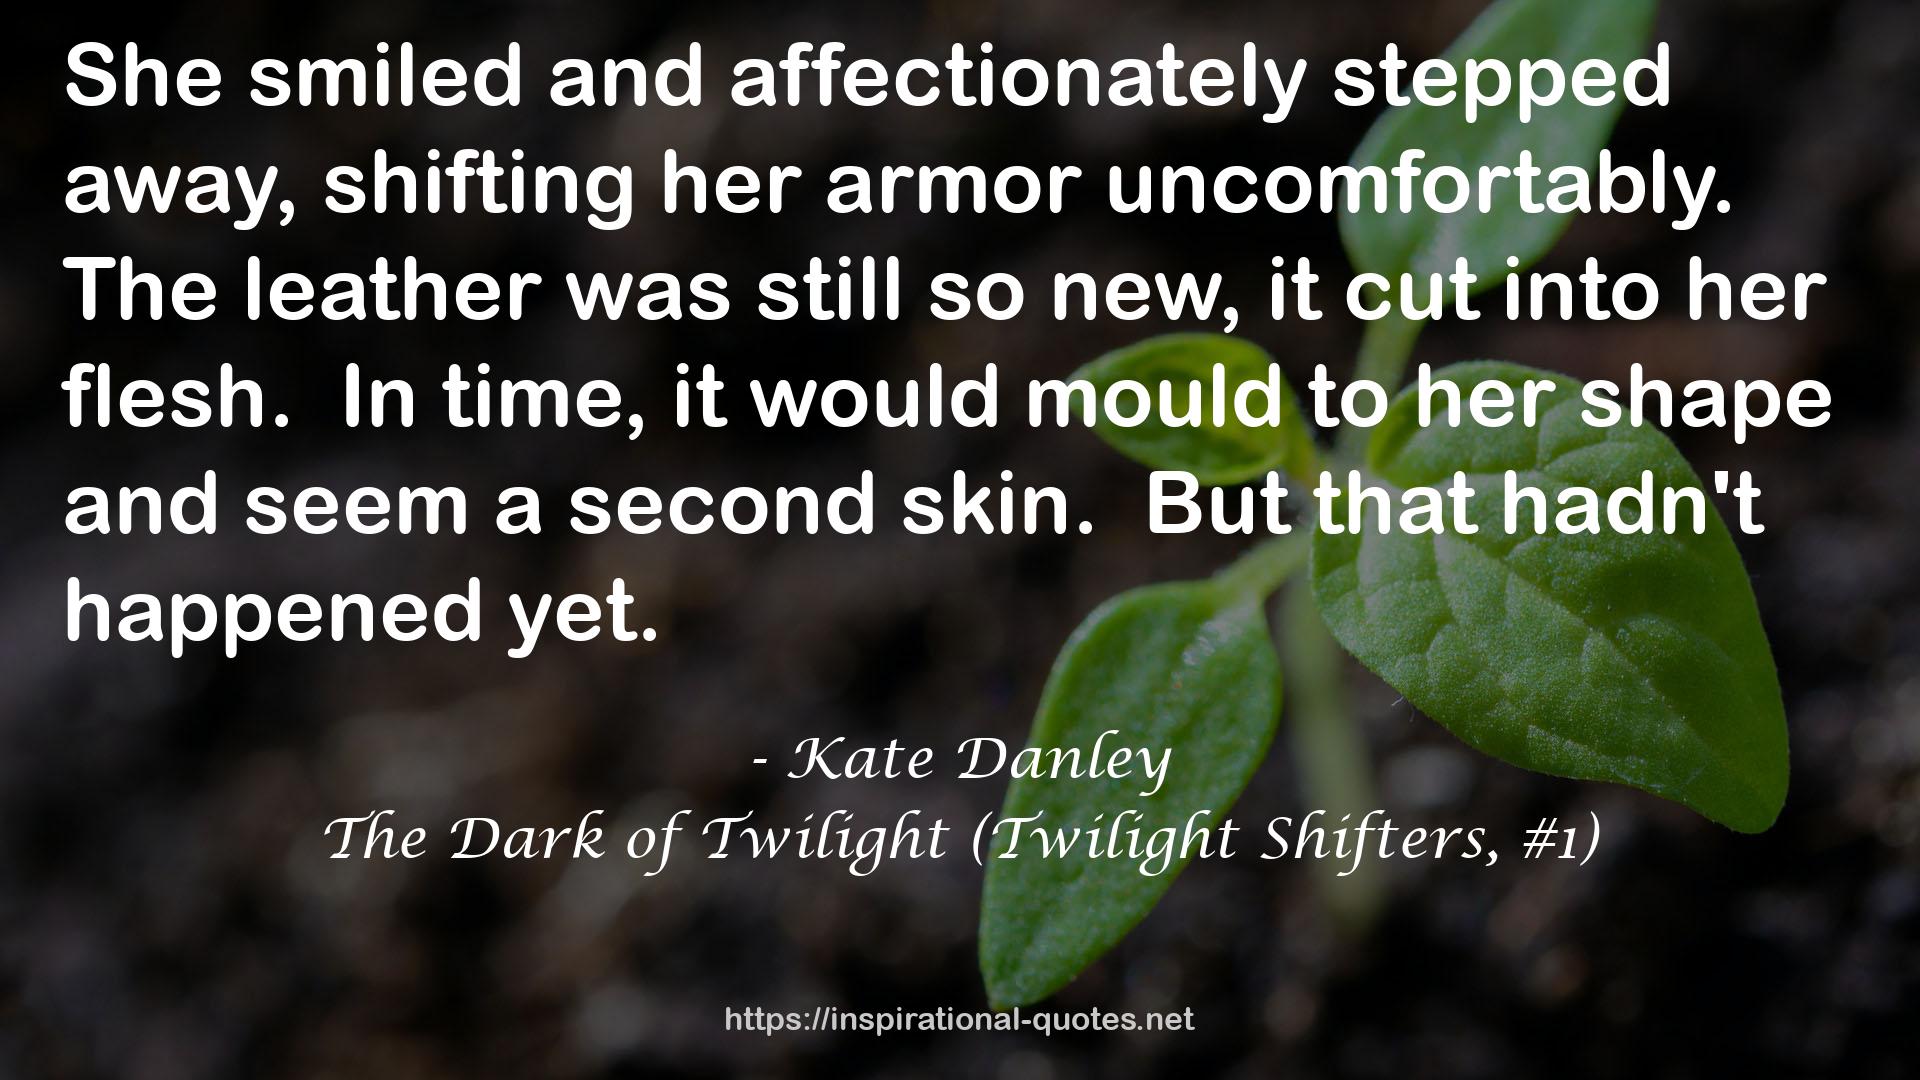 The Dark of Twilight (Twilight Shifters, #1) QUOTES